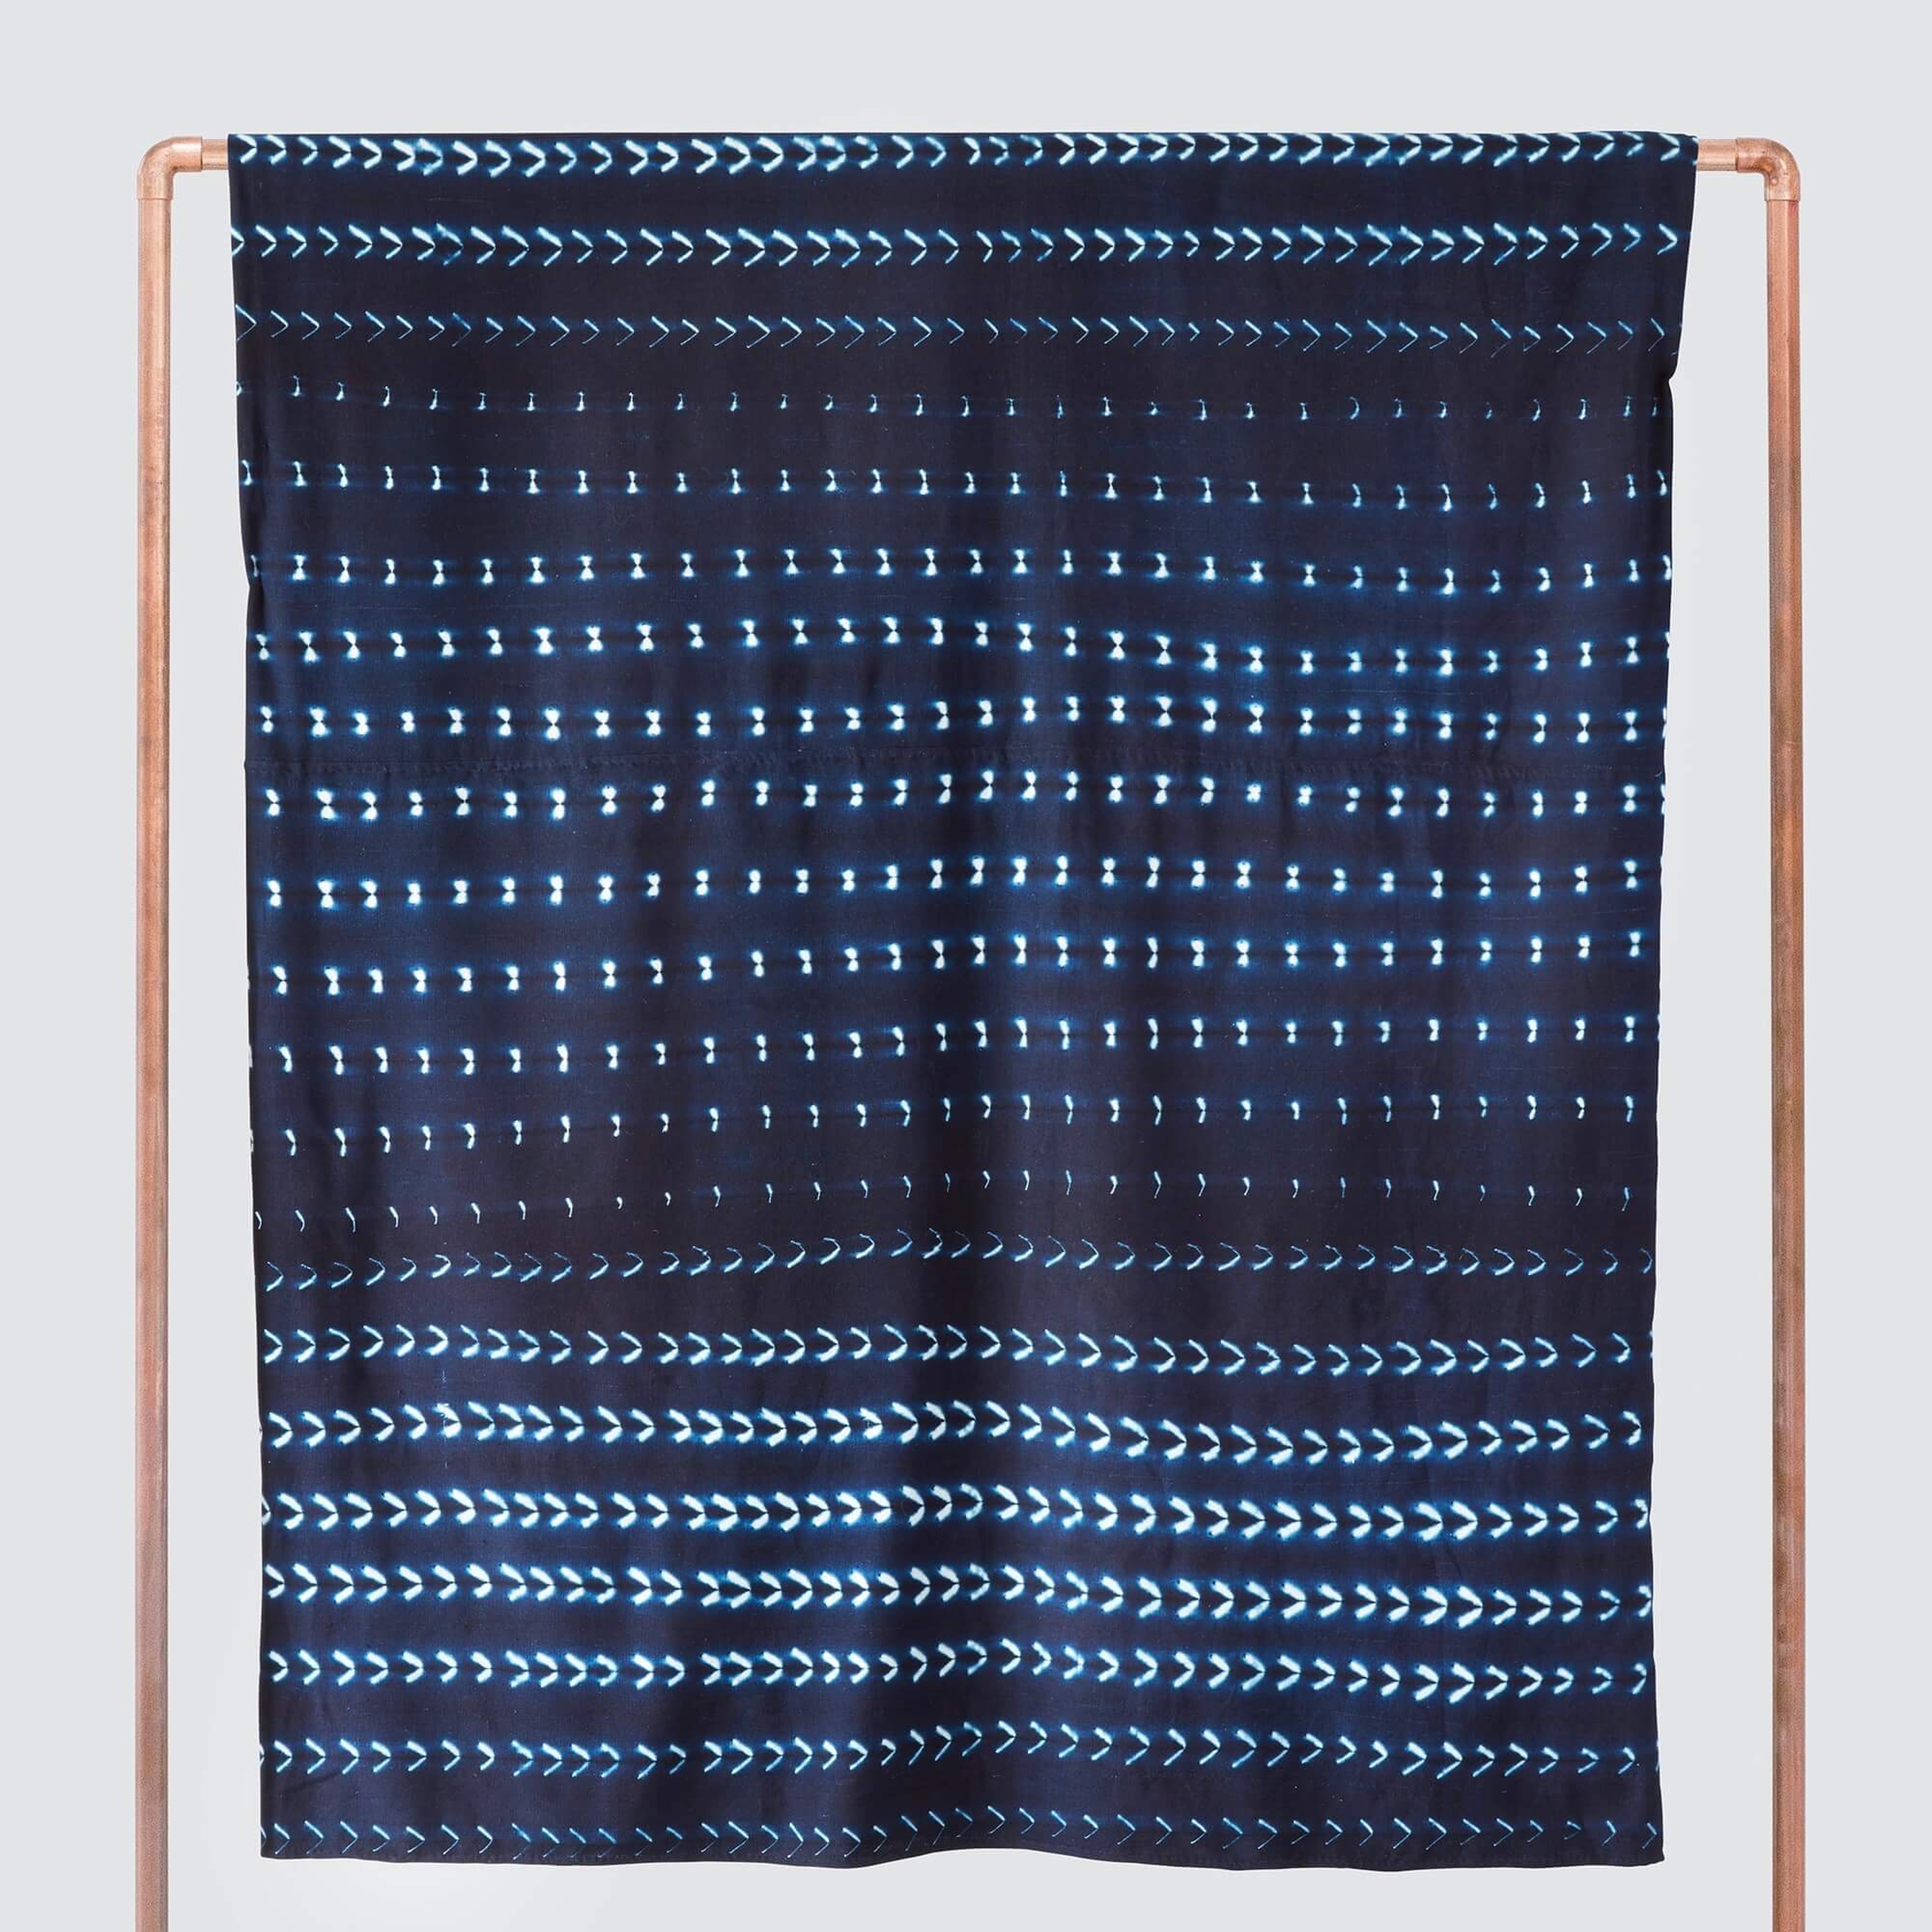 Arala Indigo Bed Blanket By The Citizenry - The Citizenry